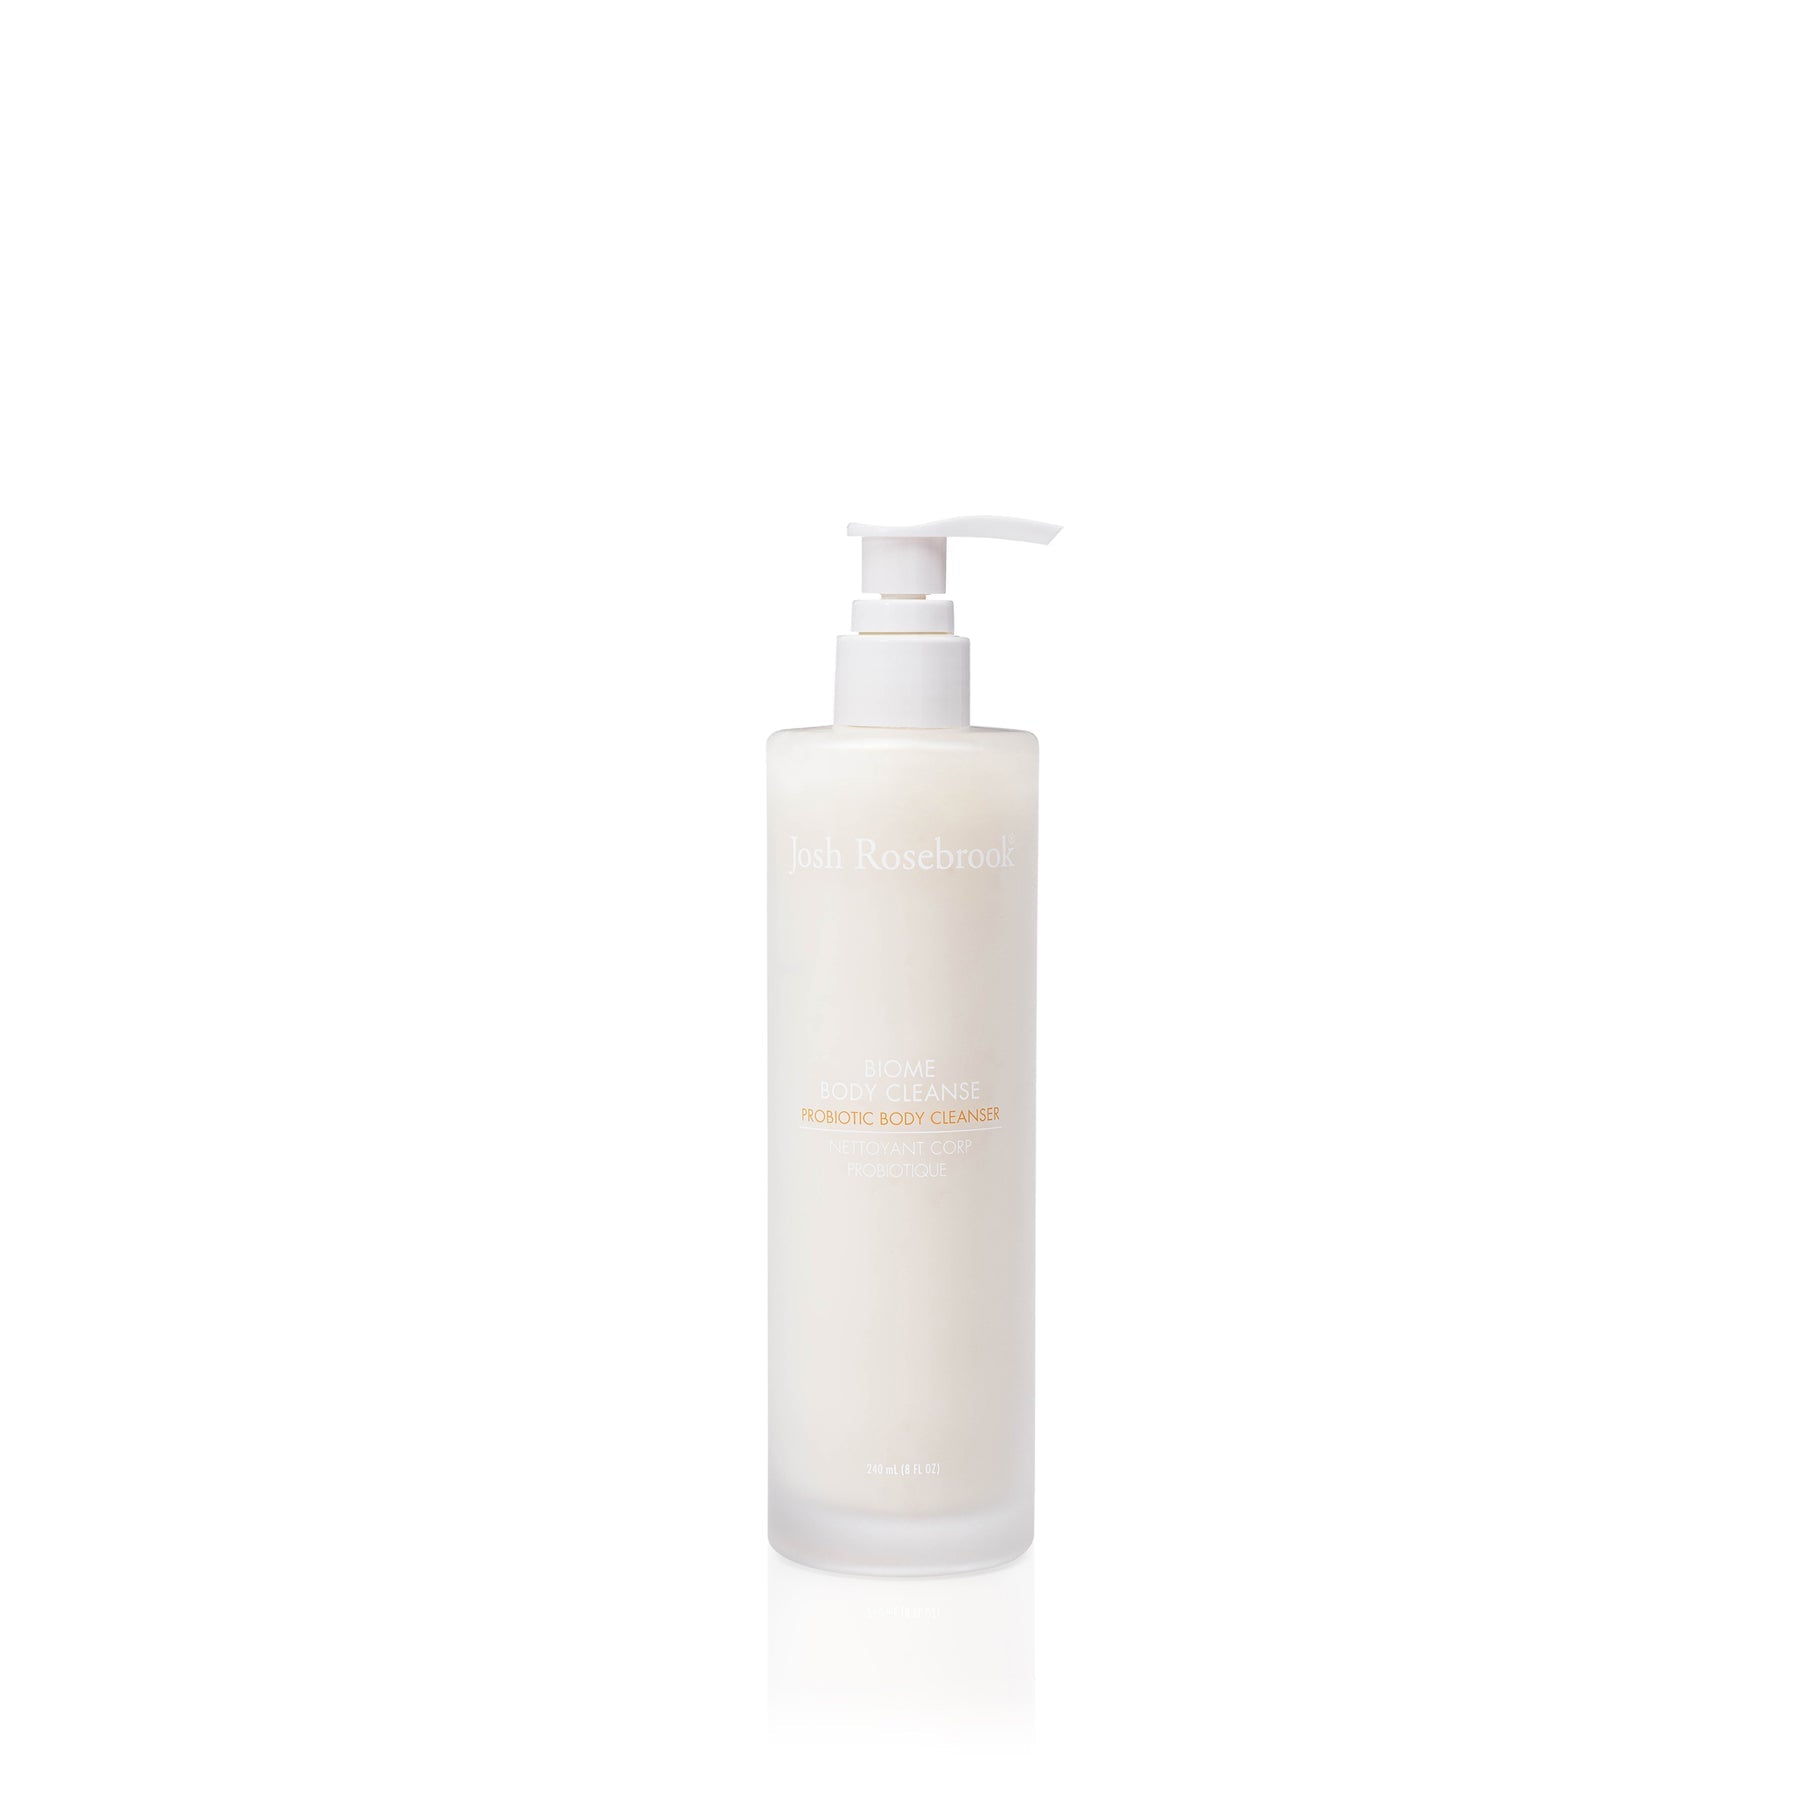 Josh Rosebrook® Biome Body Cleanse - Probiotic Body Cleanser at Socialite Beauty Canada